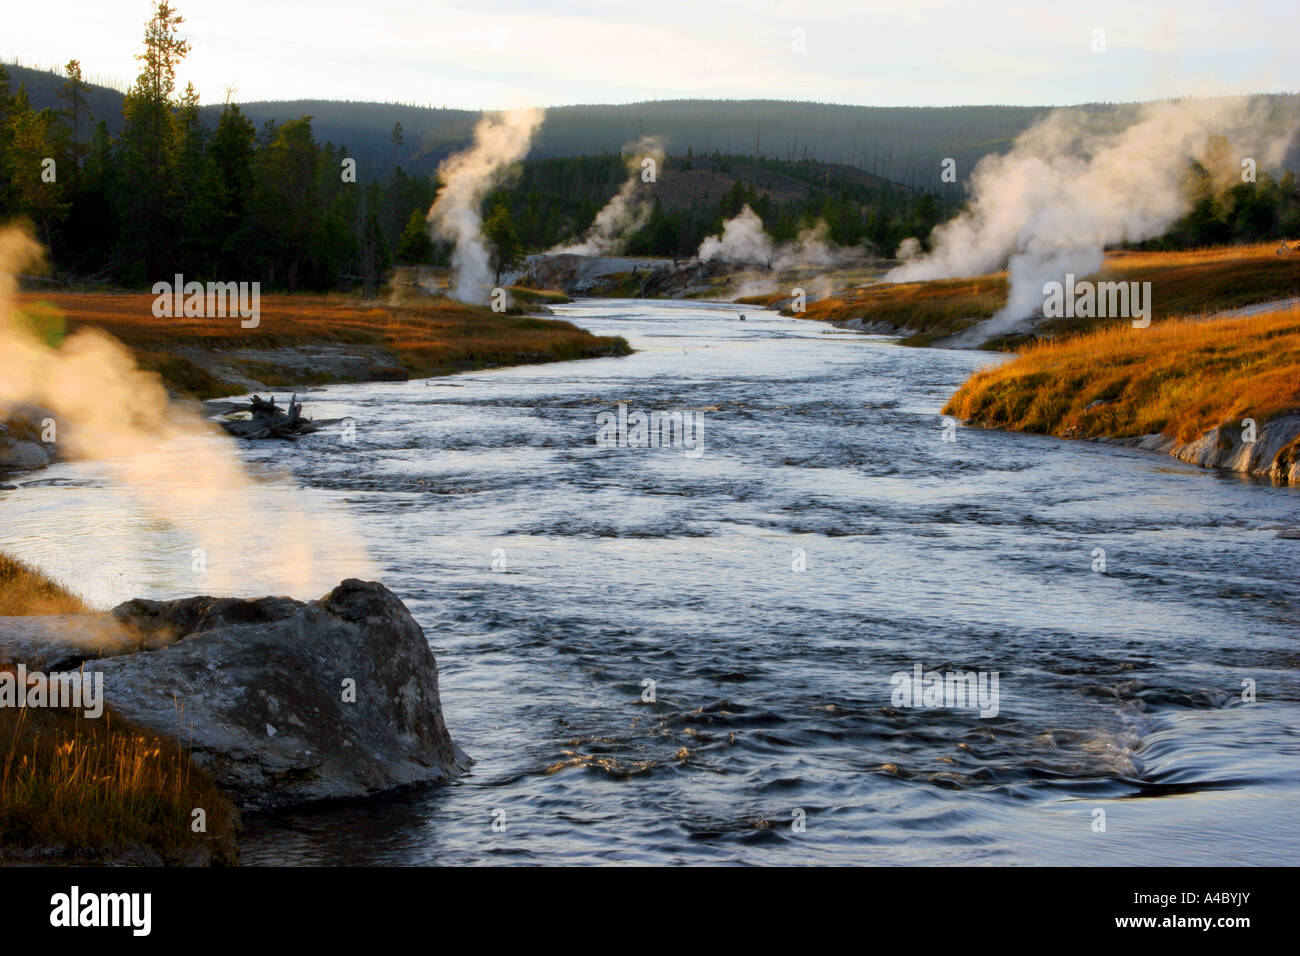 Firehole river in geyser Old Faithful area, il parco nazionale di Yellowstone, wyoming Foto Stock